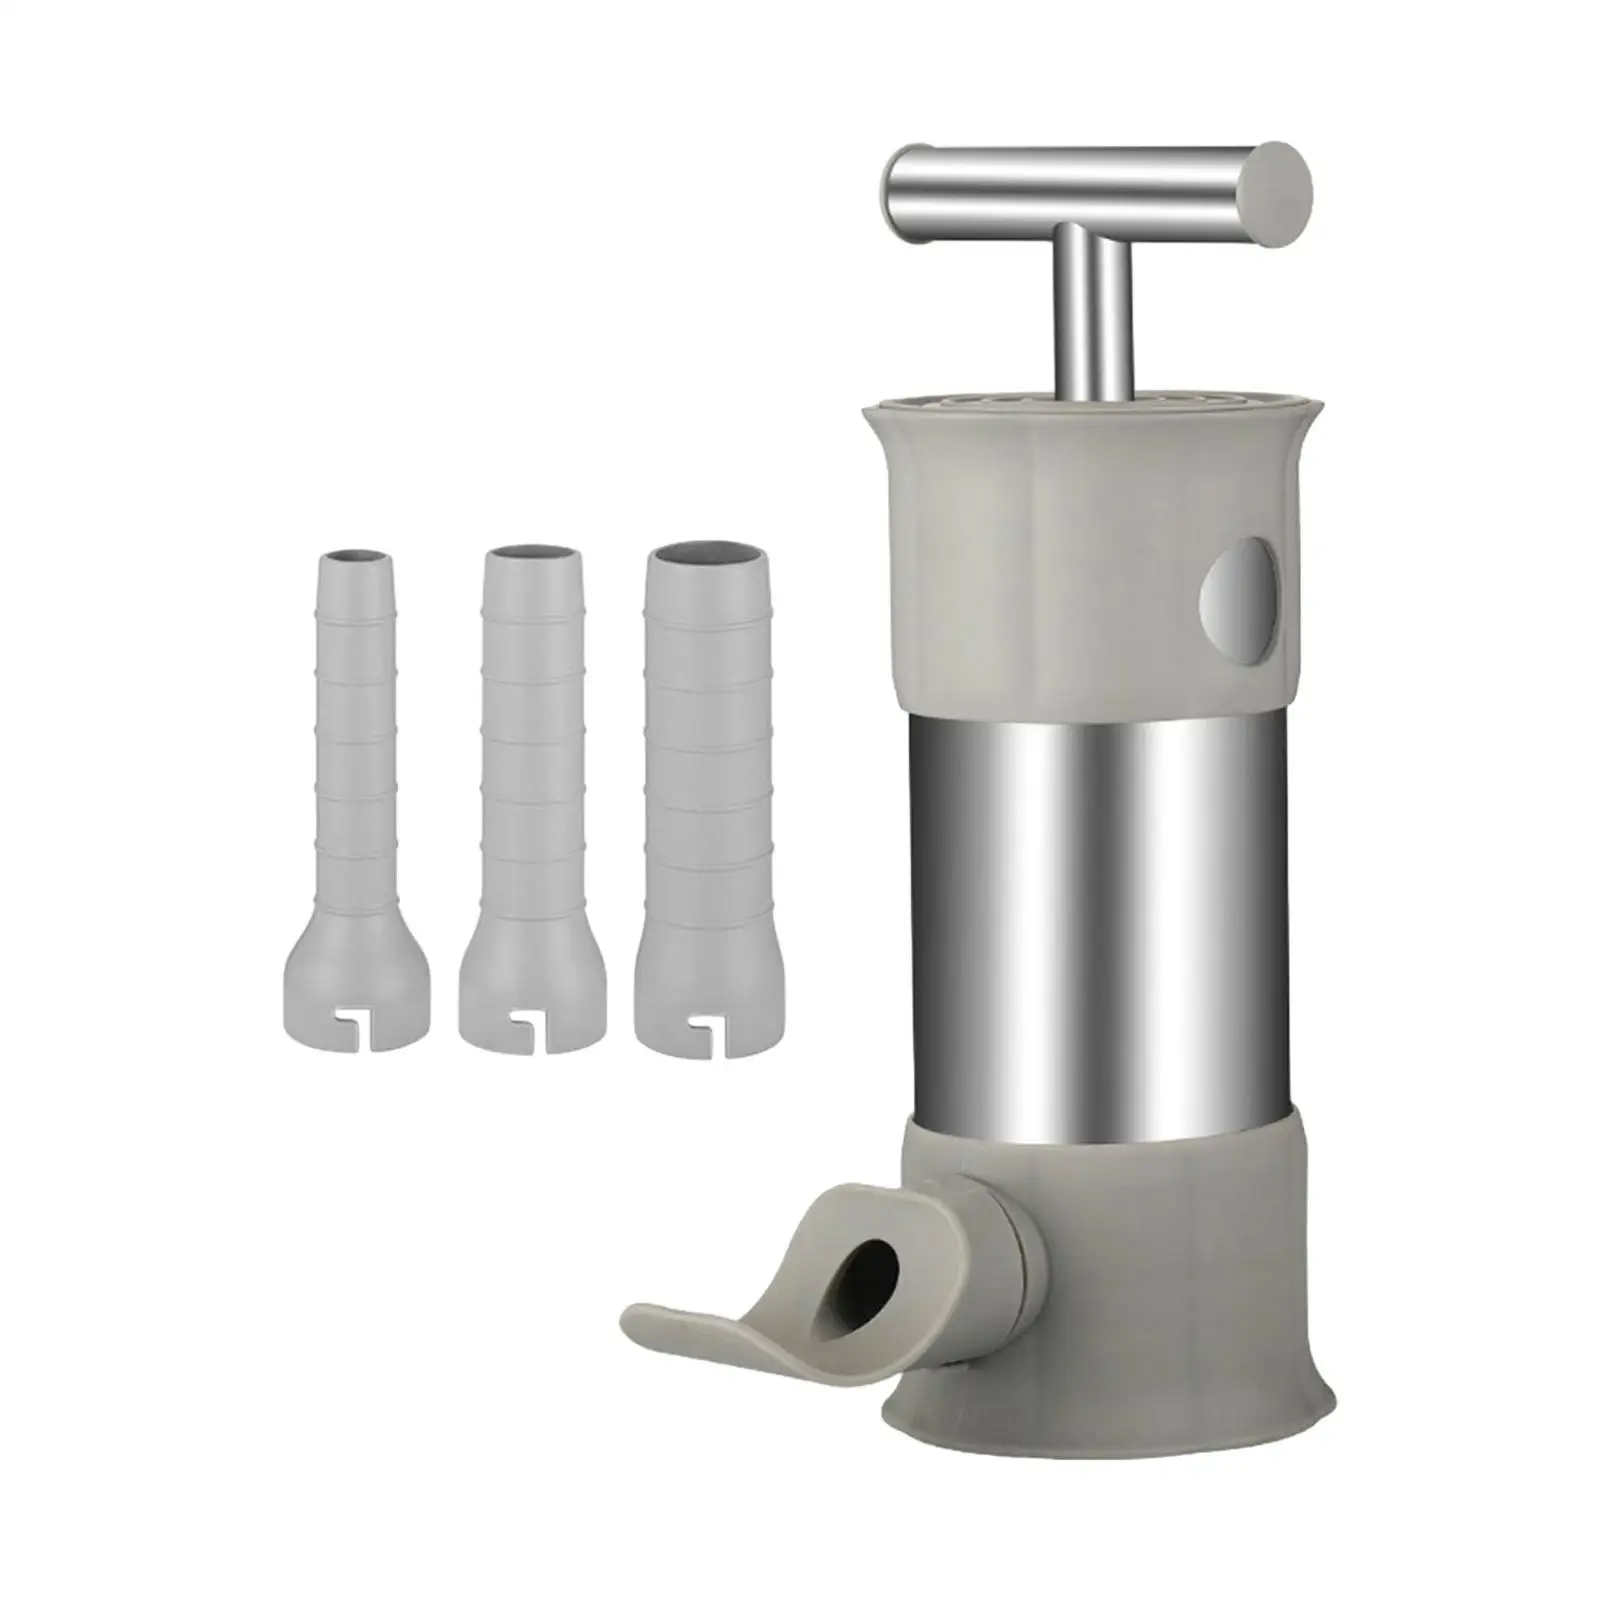 Sausage Filling Tools Meat Grinder for Household Stainless Steel Handheld Stuffing Tubes Sausage Maker Meat Sausage Machine